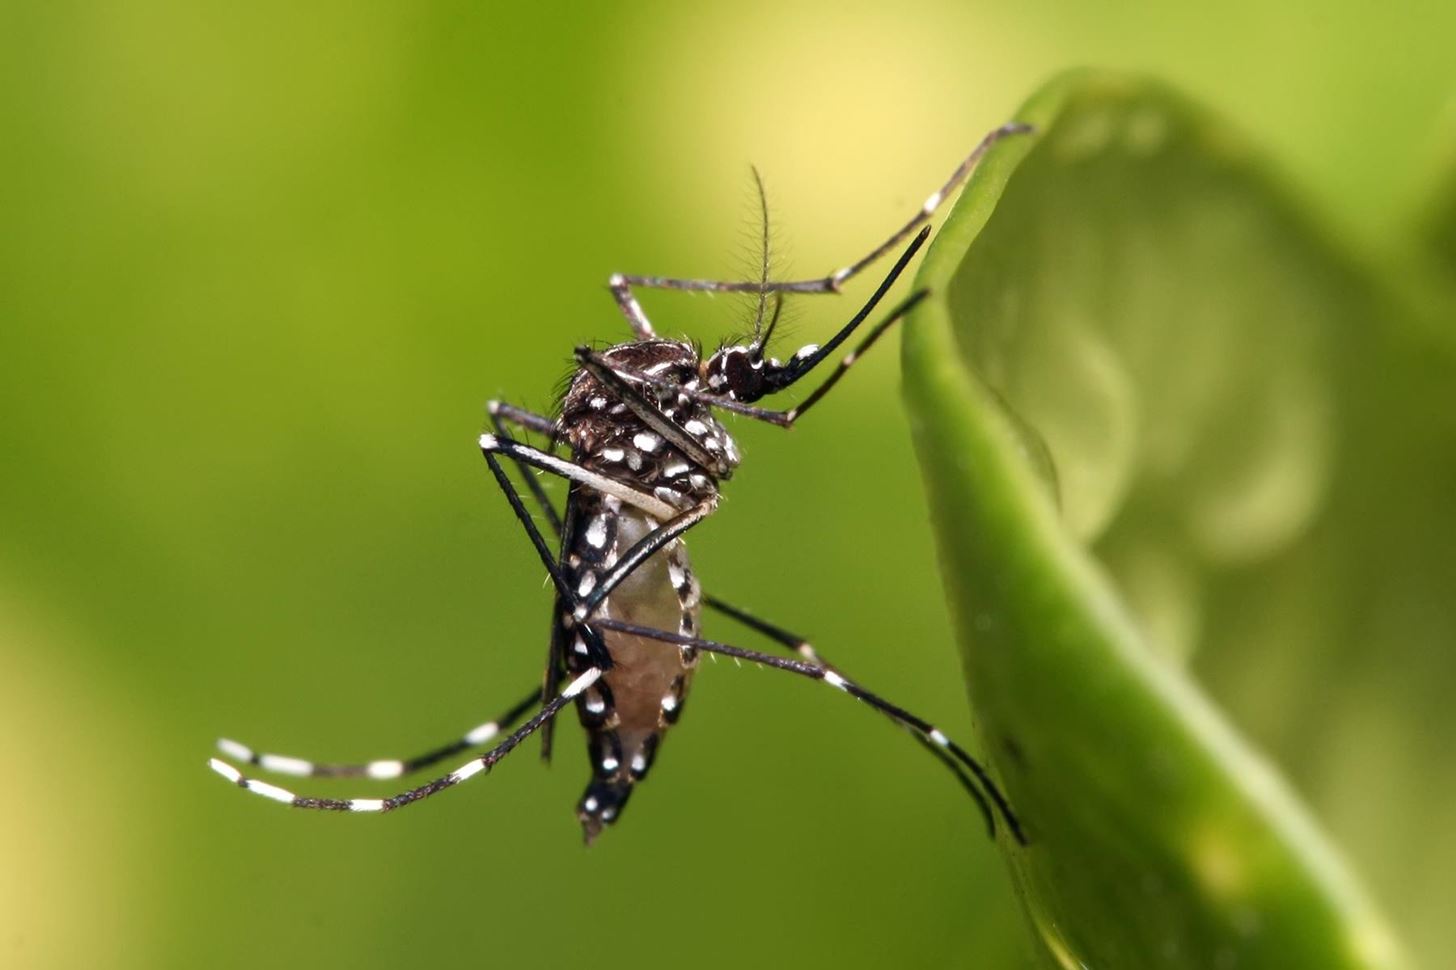 Even Without Symptoms, Men Could Suffer Lasting Fertility Impacts from Zika